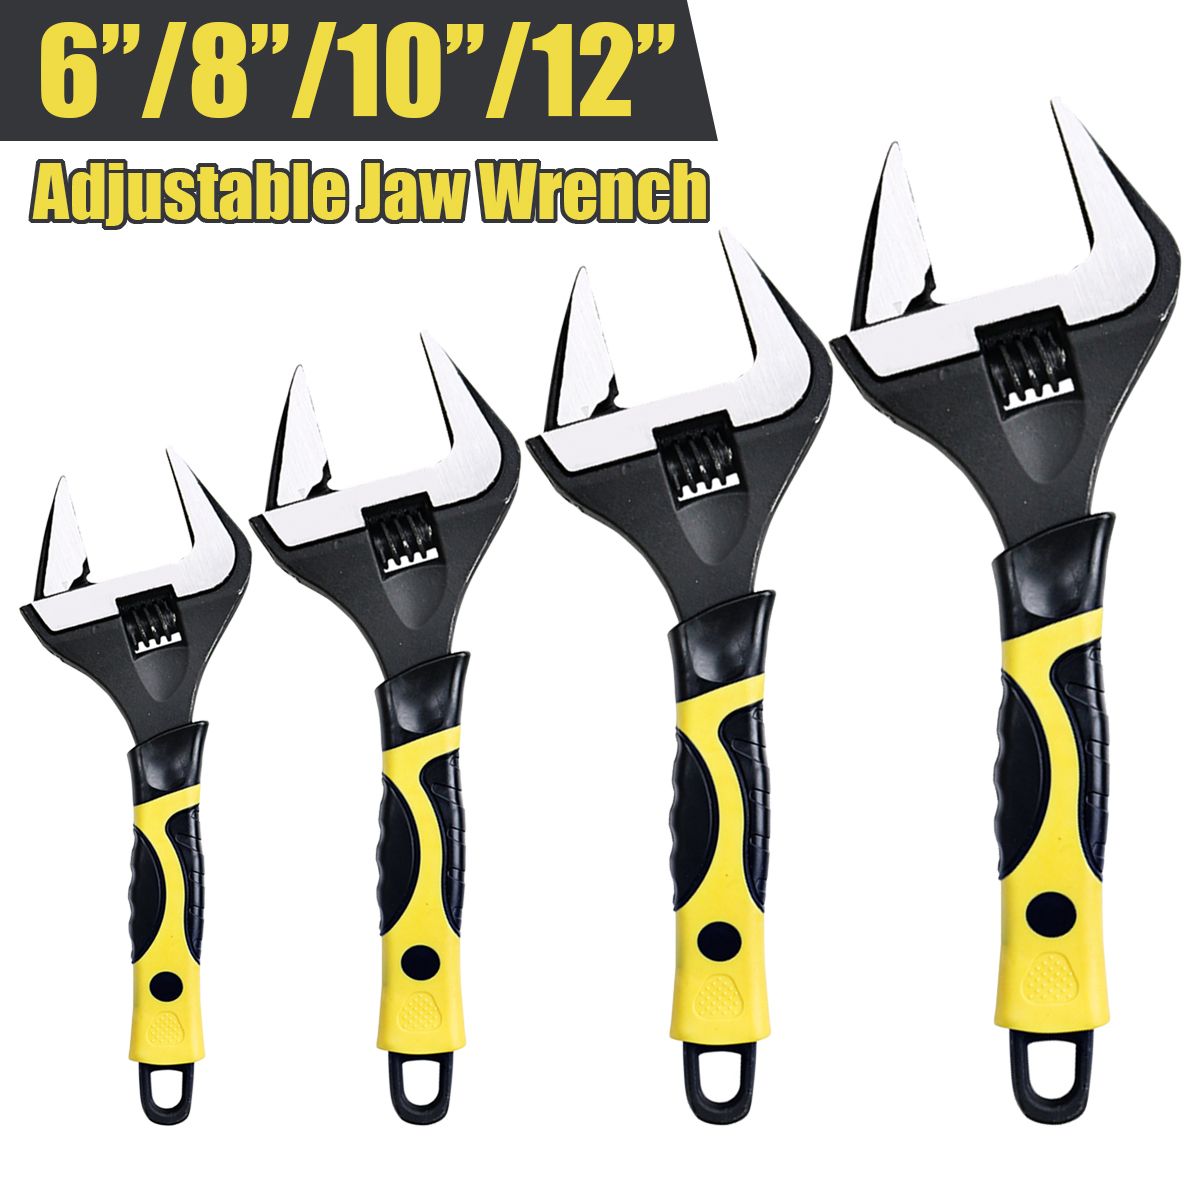 Large-Extra-Wide-Jaw-Adjustable-Spanner-Wrench-Openning-Capacity-Nut-Pipe-Tool-1766060